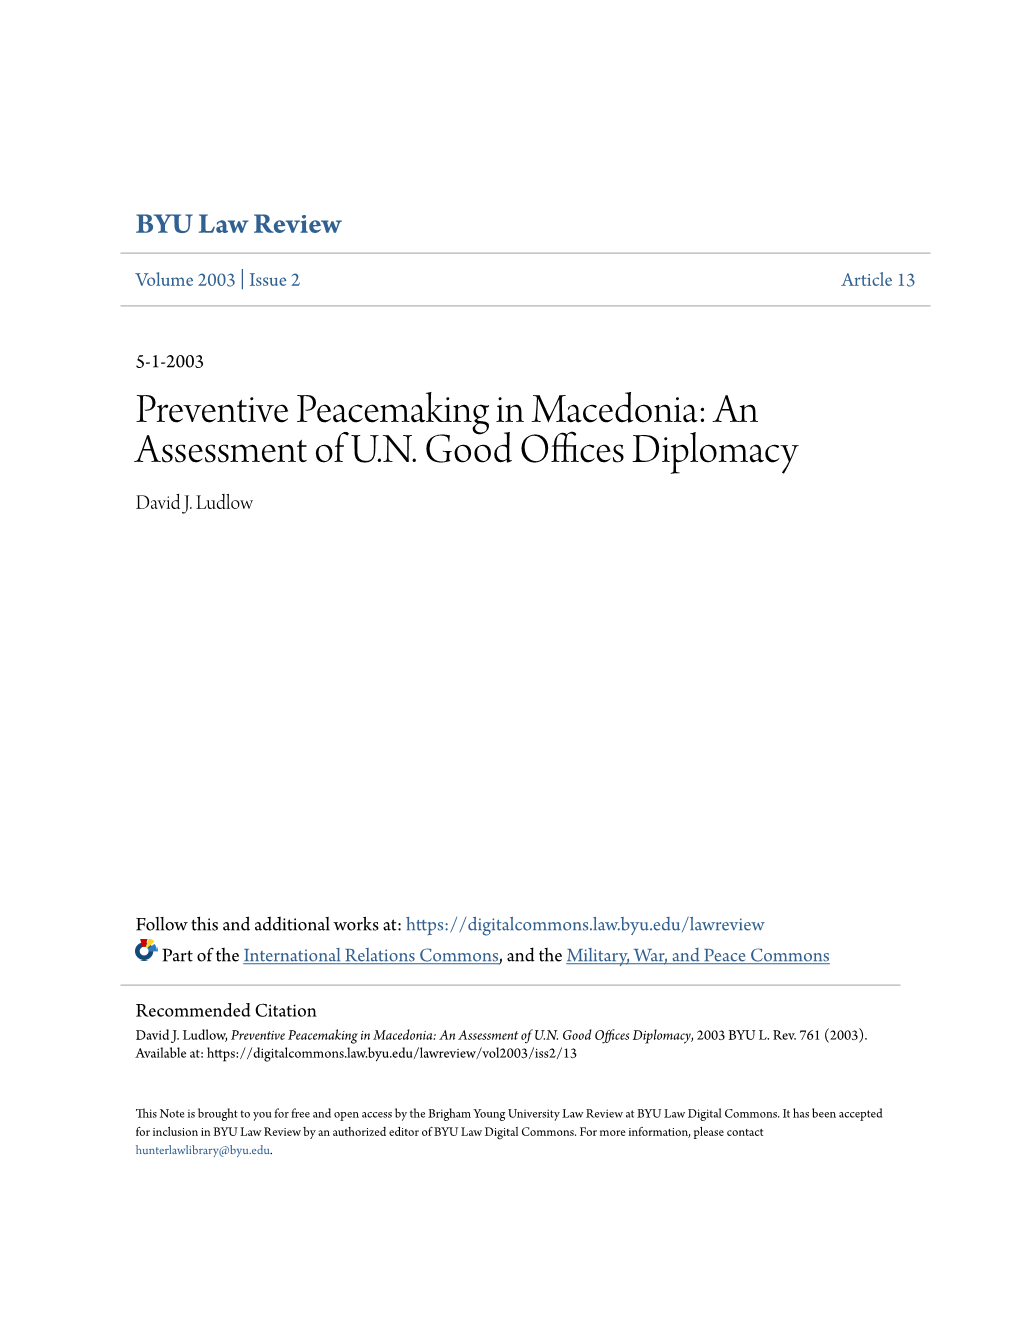 Preventive Peacemaking in Macedonia: an Assessment of U.N